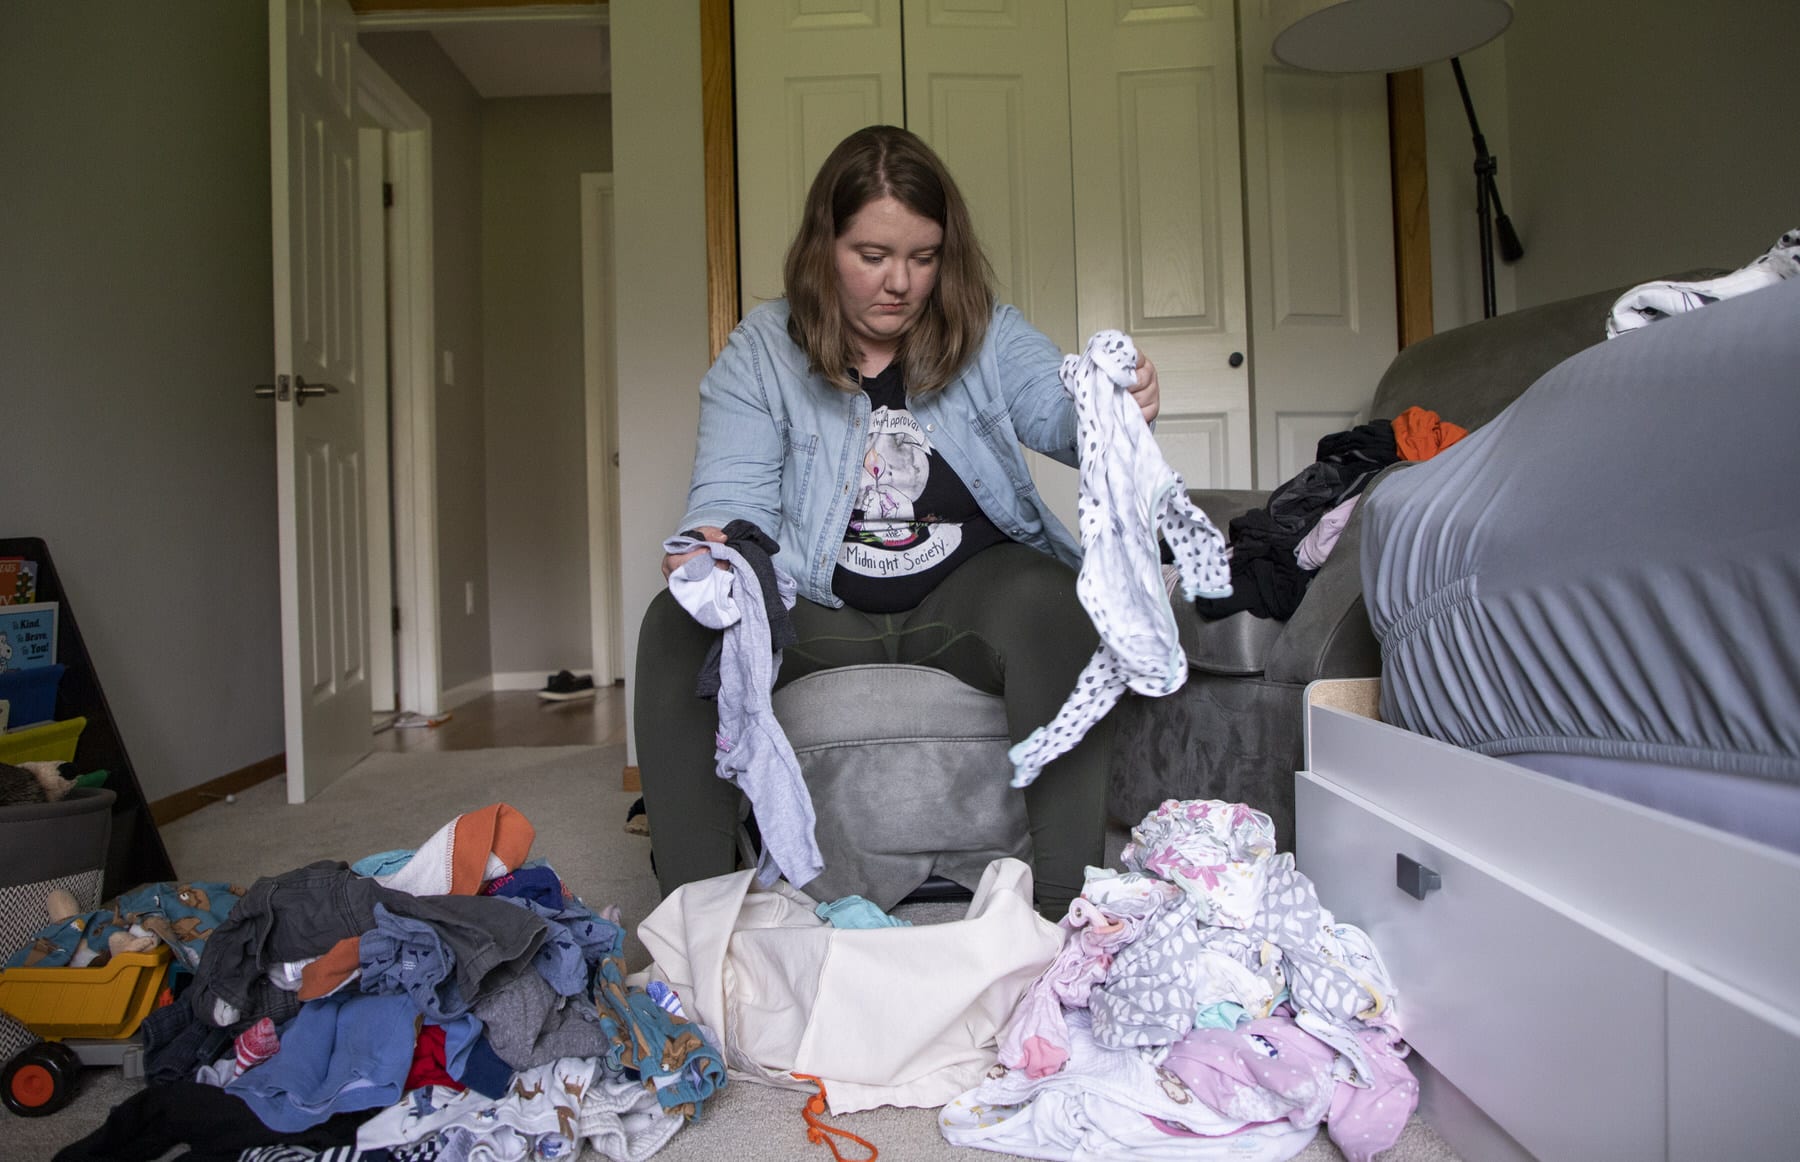 A mother sorts through laundry.